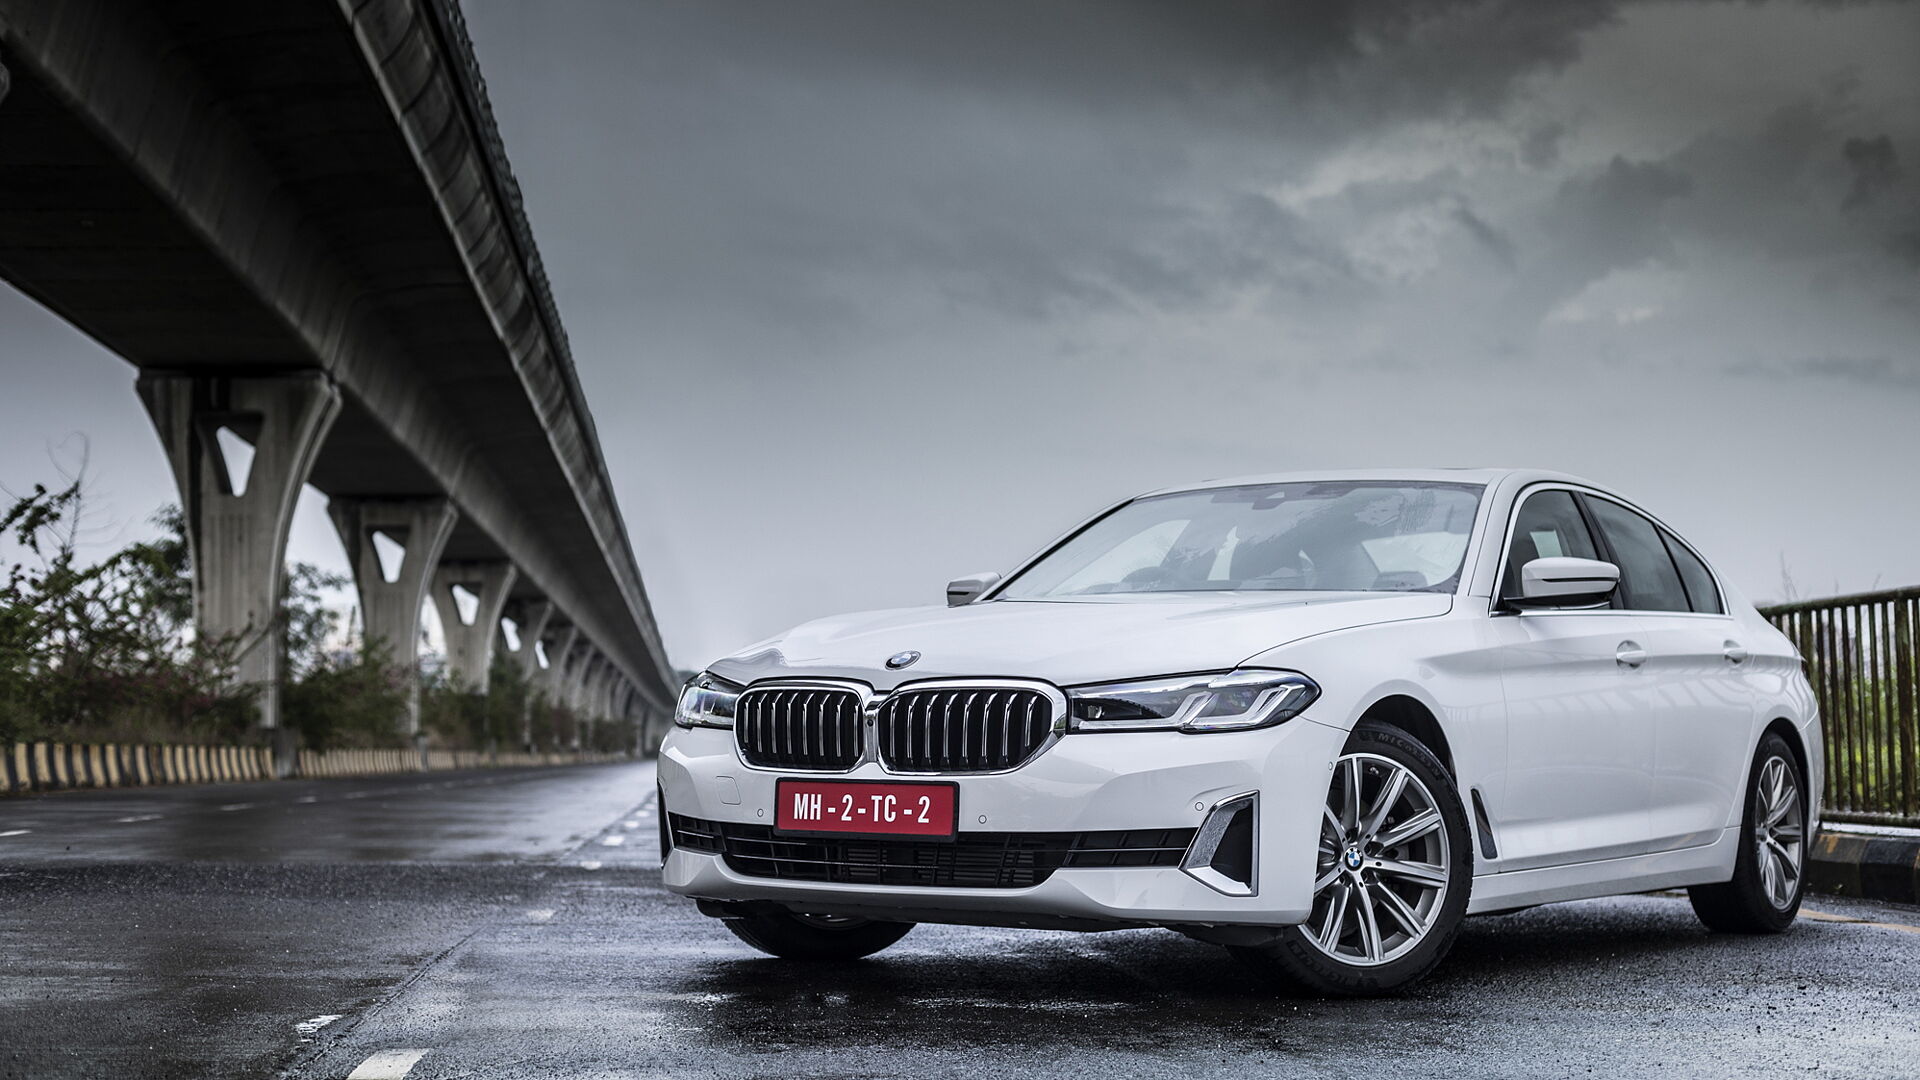 From BMW X to 5 Series: All BMW Series & Models Explained